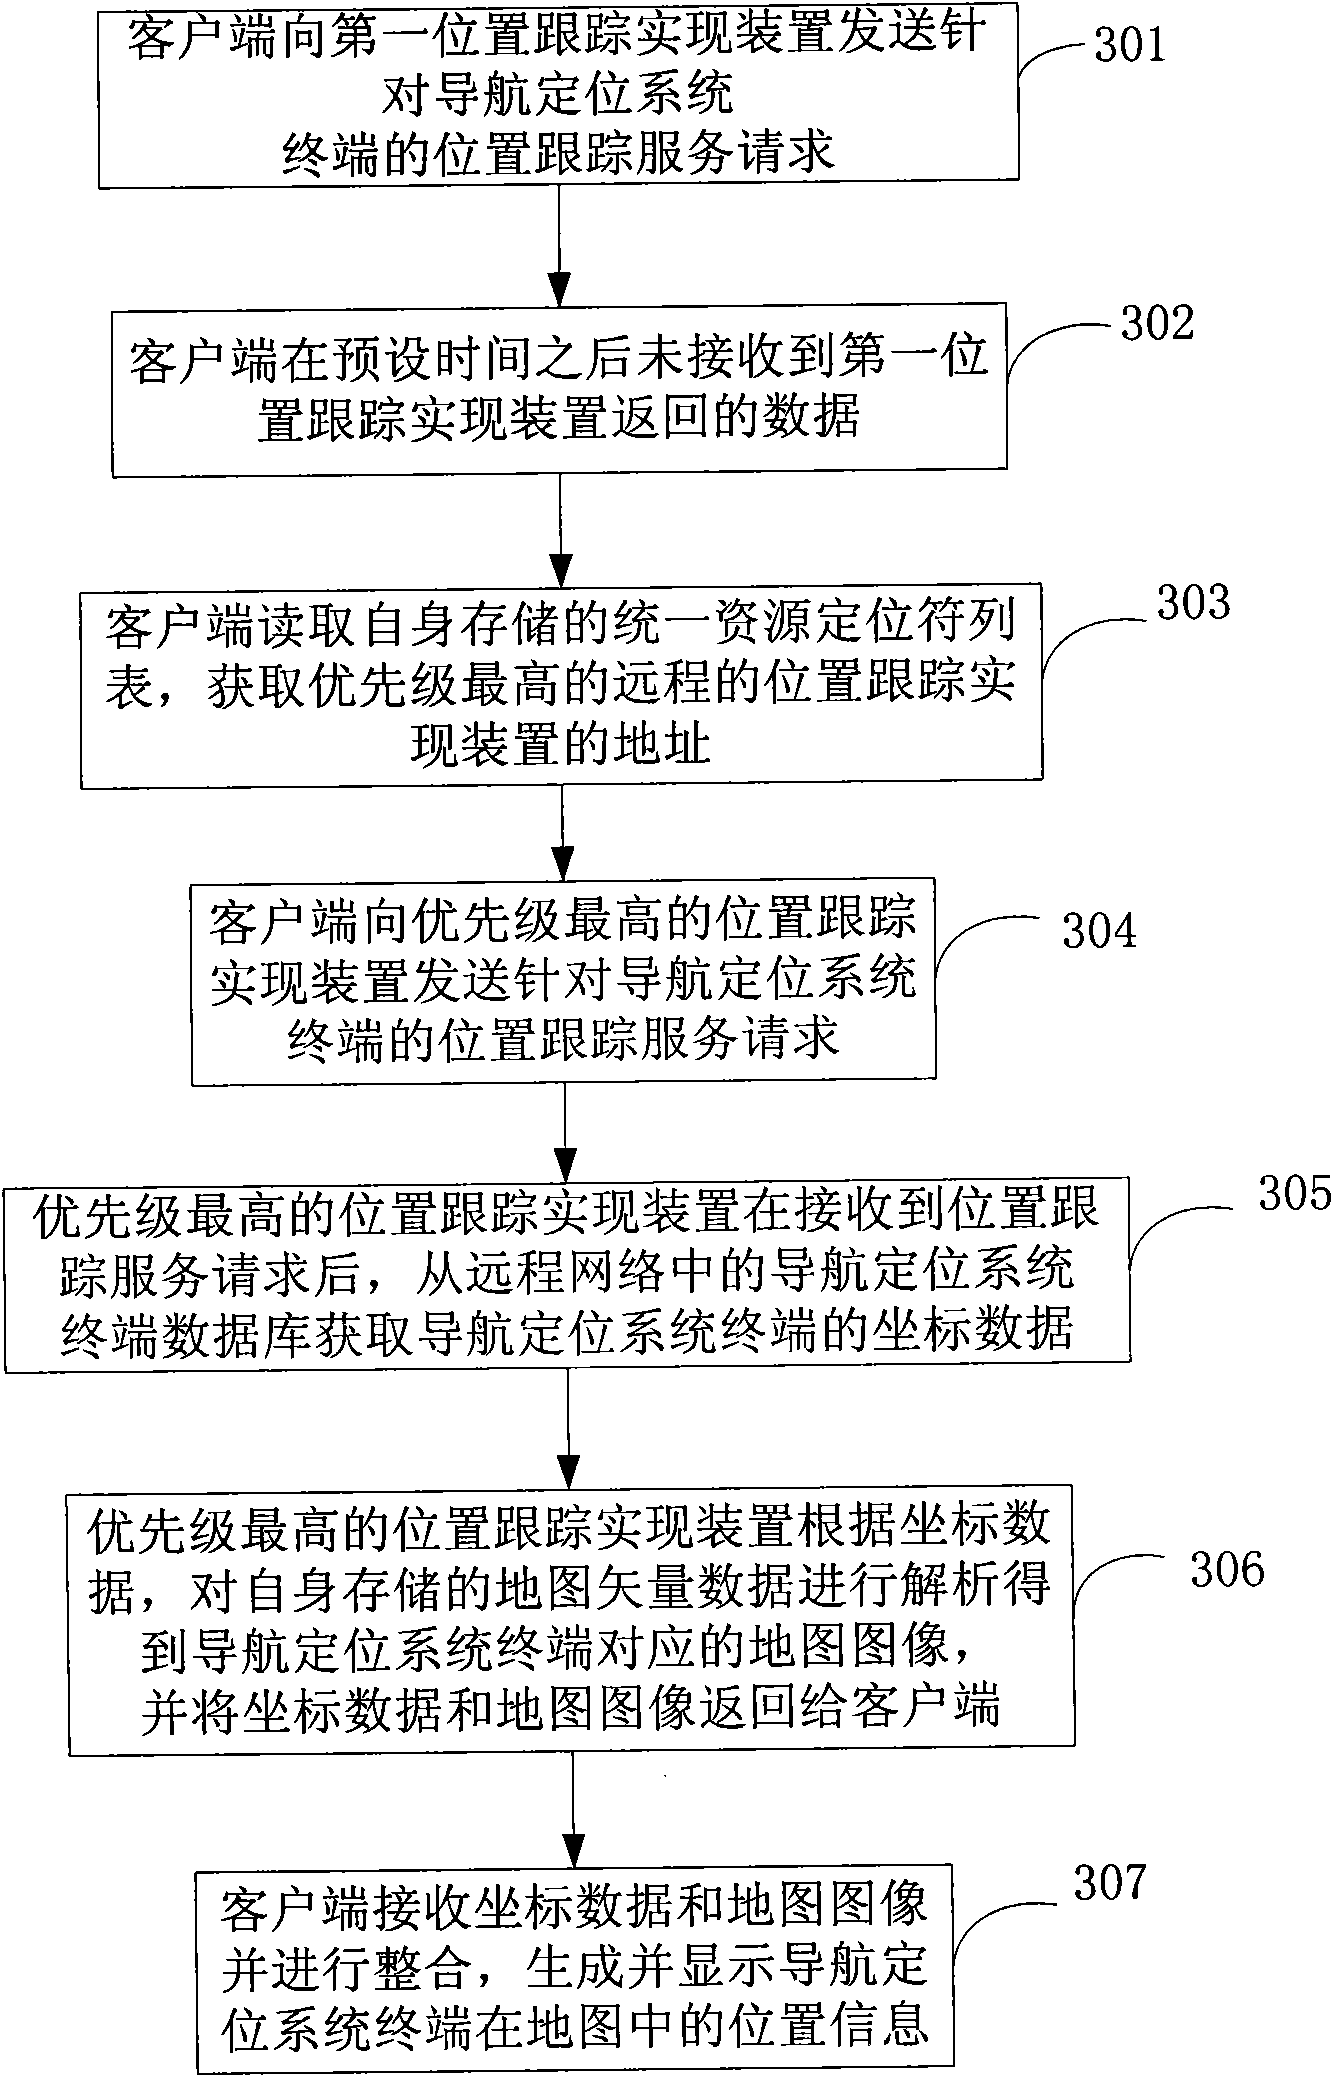 Position tracking implementation method, device and system